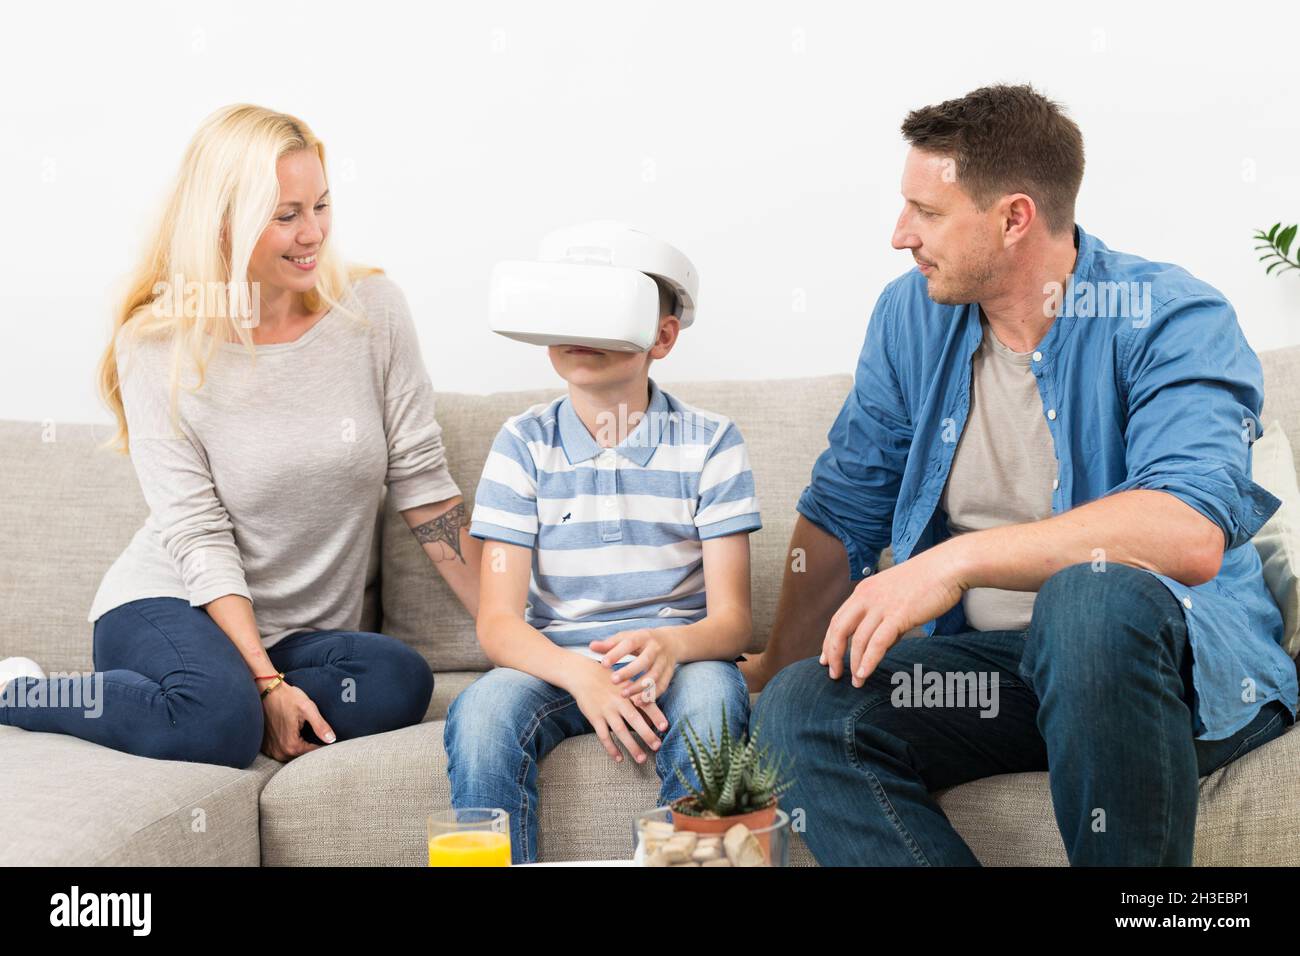 Happy family at home on living room sofa having fun playing games using virtual reality headset Stock Photo